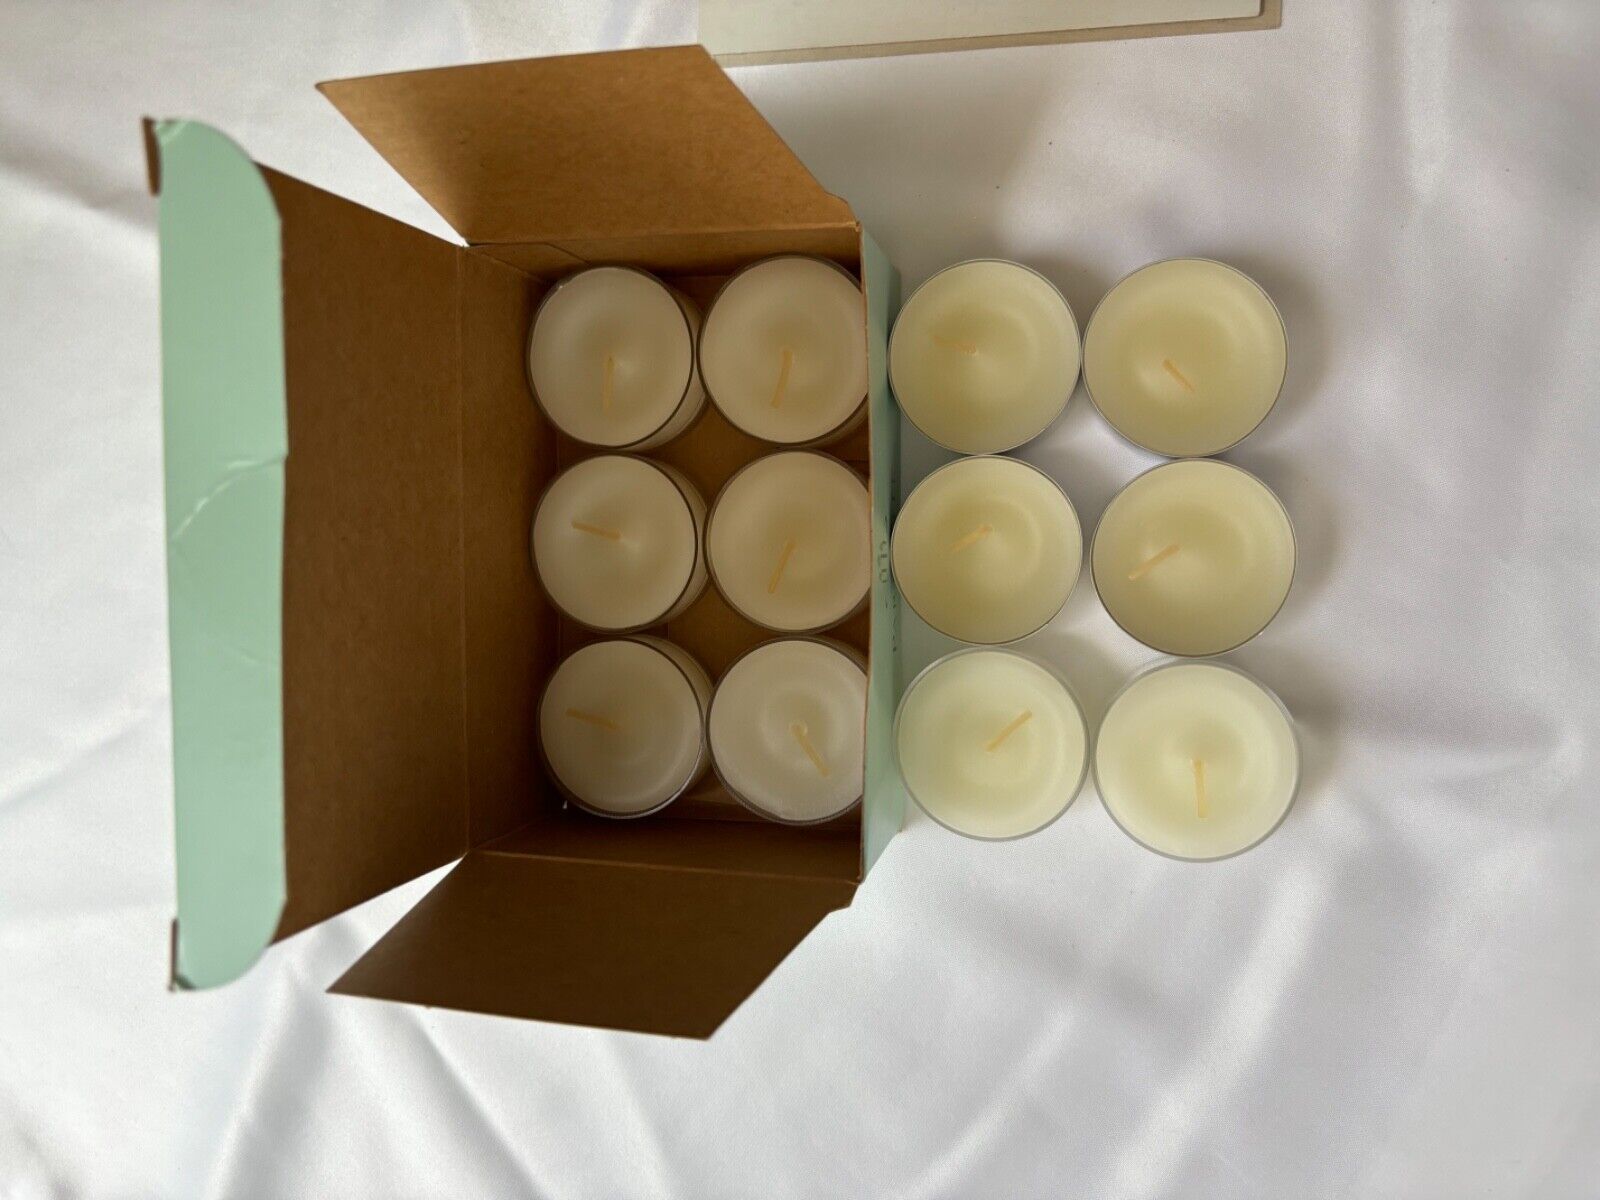 PartyLite Tealights - New in the Box. Multiple Scents available all Retired